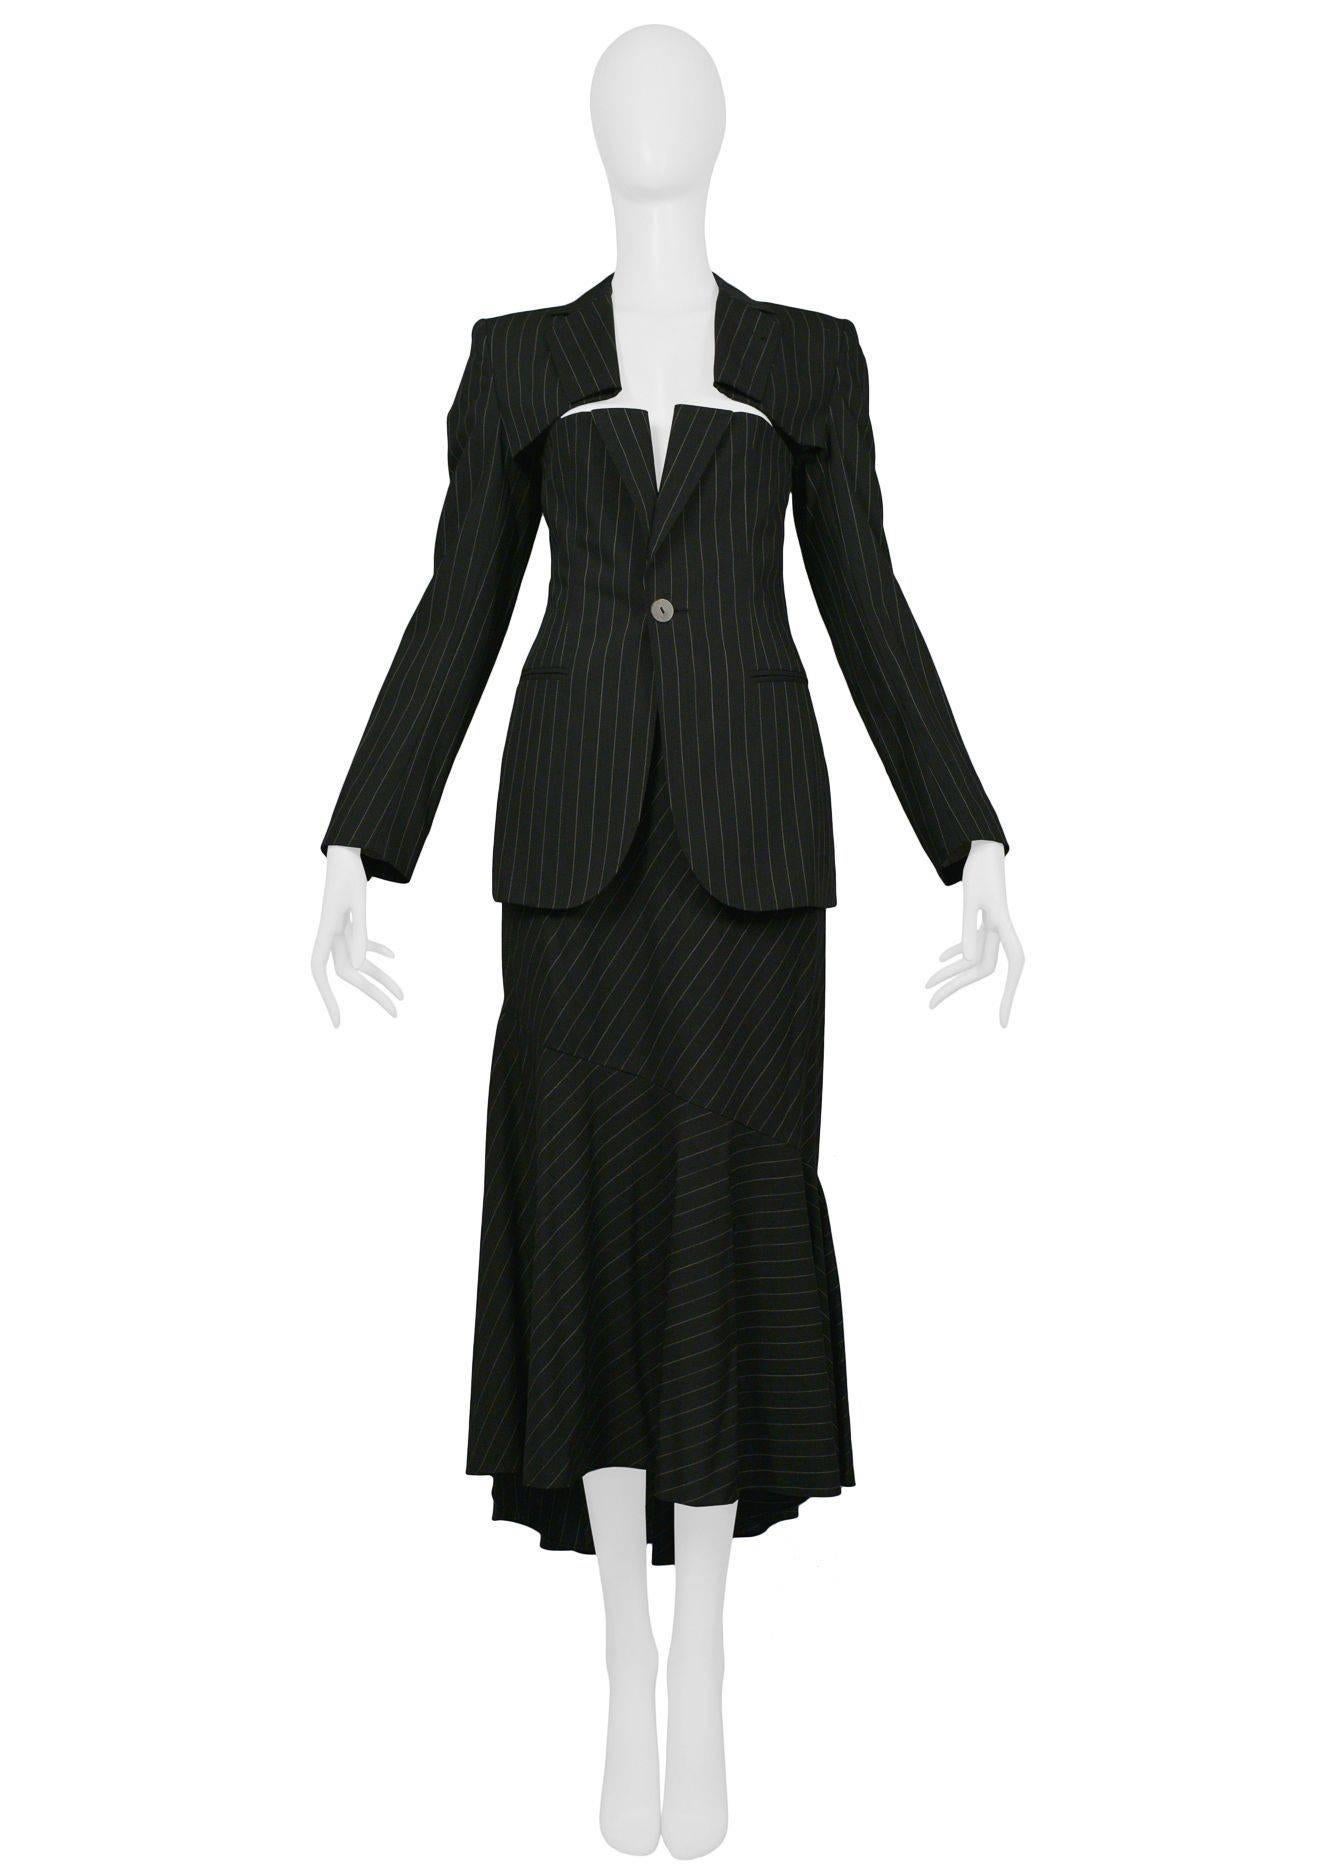 Vintage 1990's Jean Paul Gaultier pinstripe skirt ensemble. Jacket features slits at breast and fitted body. Skirt features asymmetrical ruffle detail.
